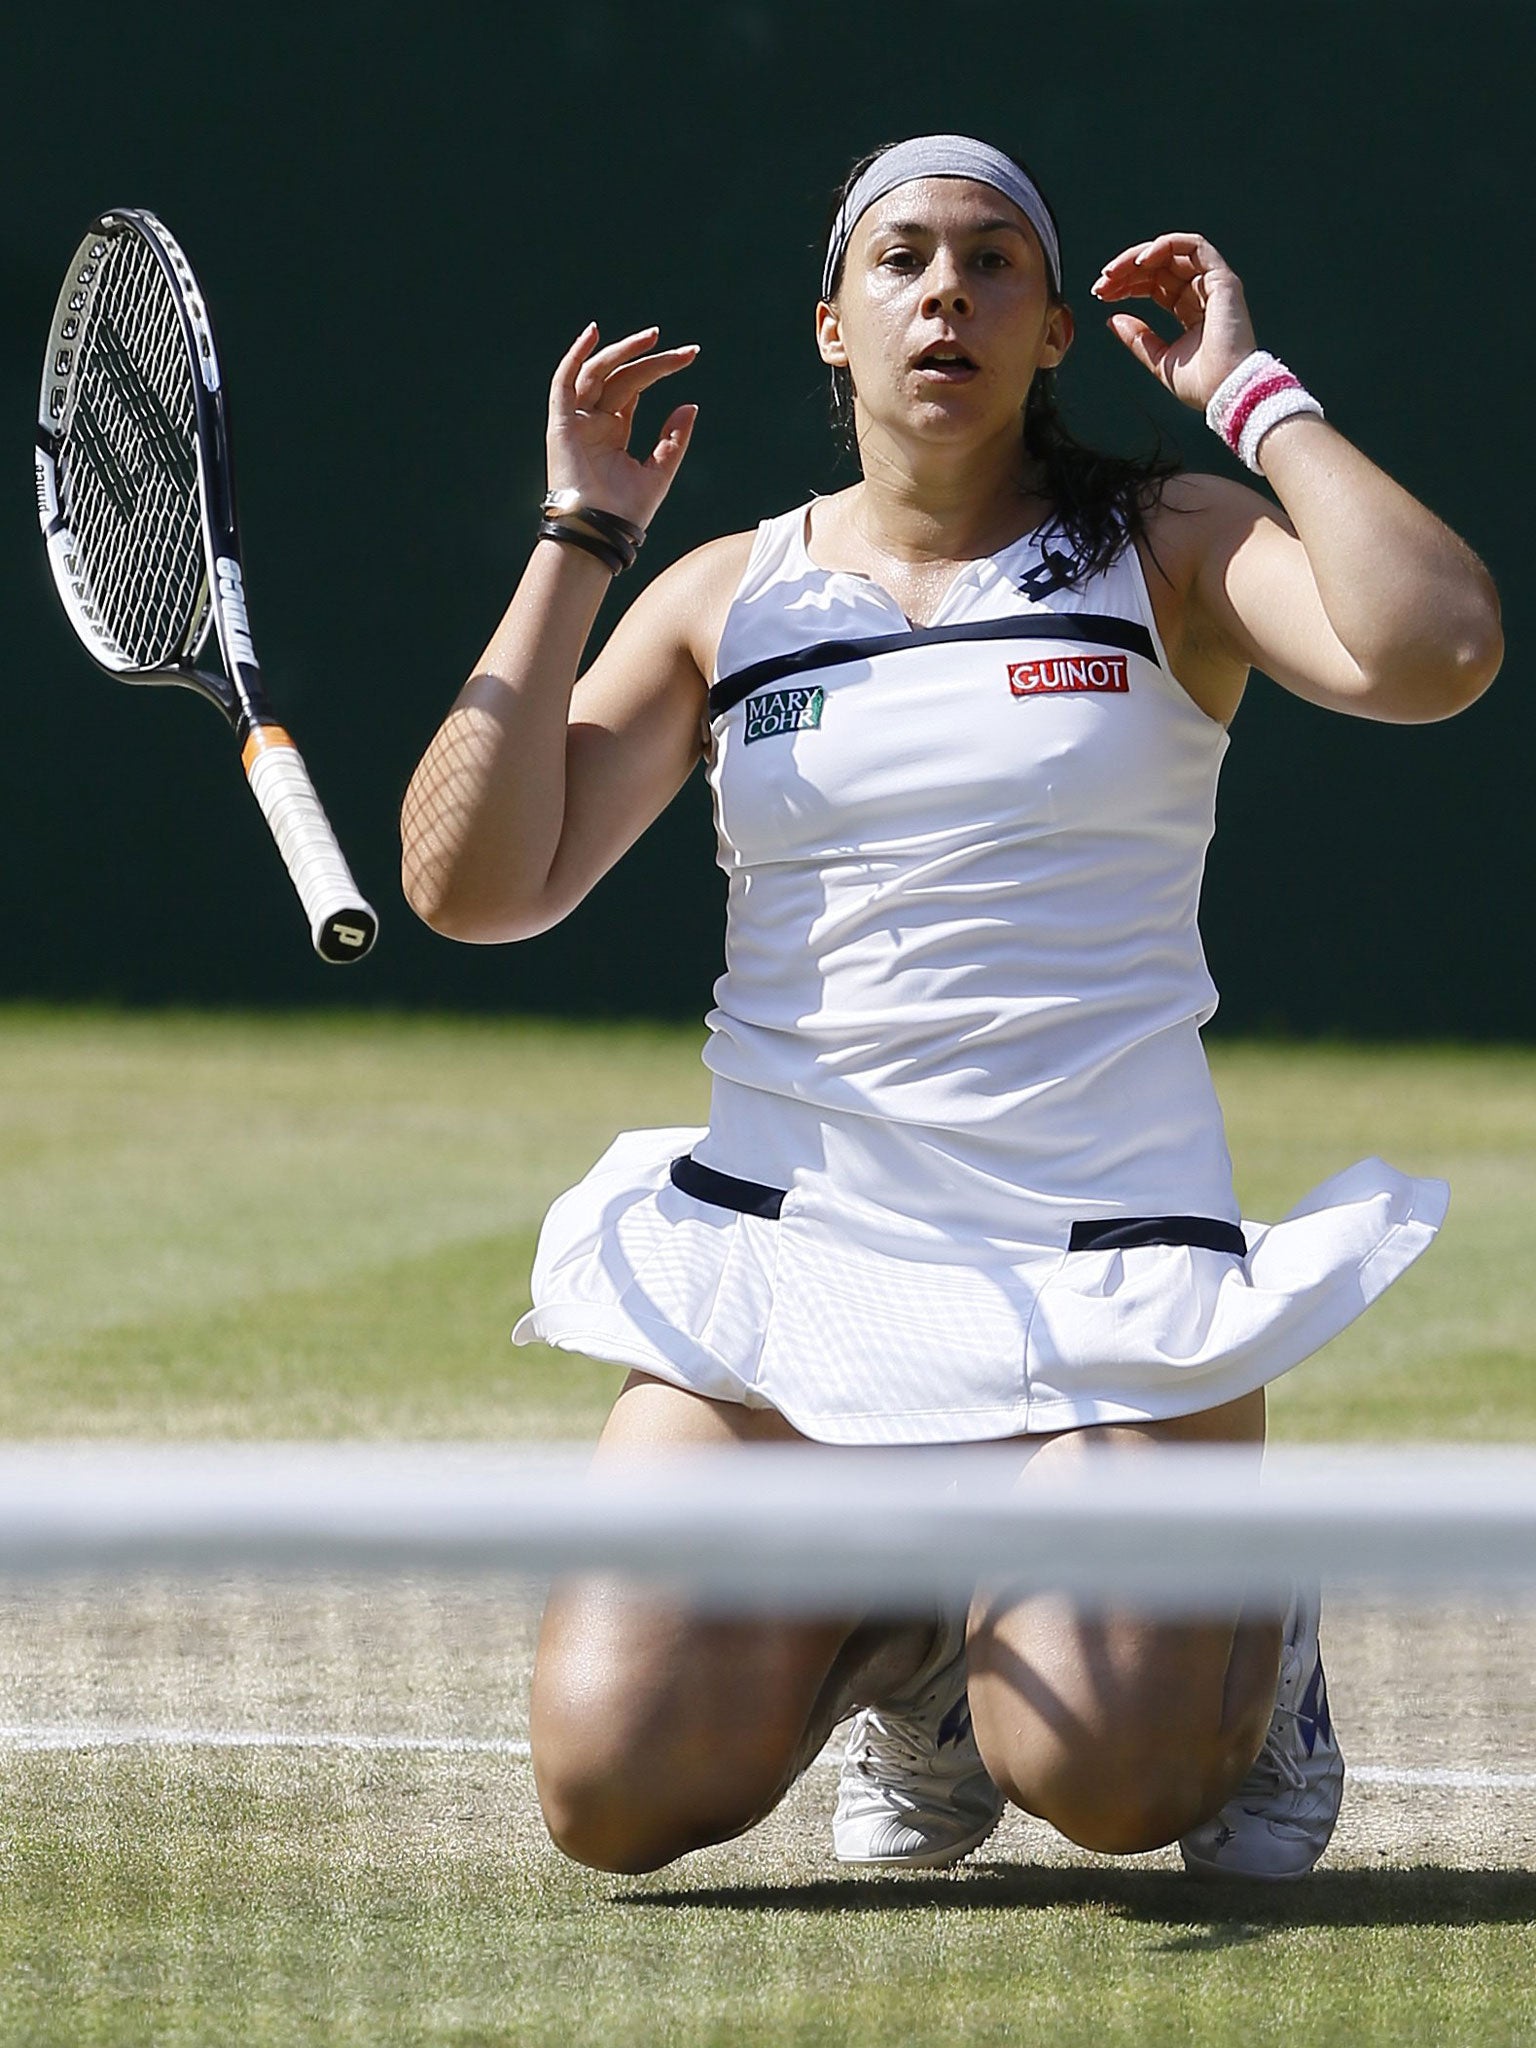 Marion Bartoli collapses to the ground after sealing her Wimbledon triumph over Sabine Lisicki